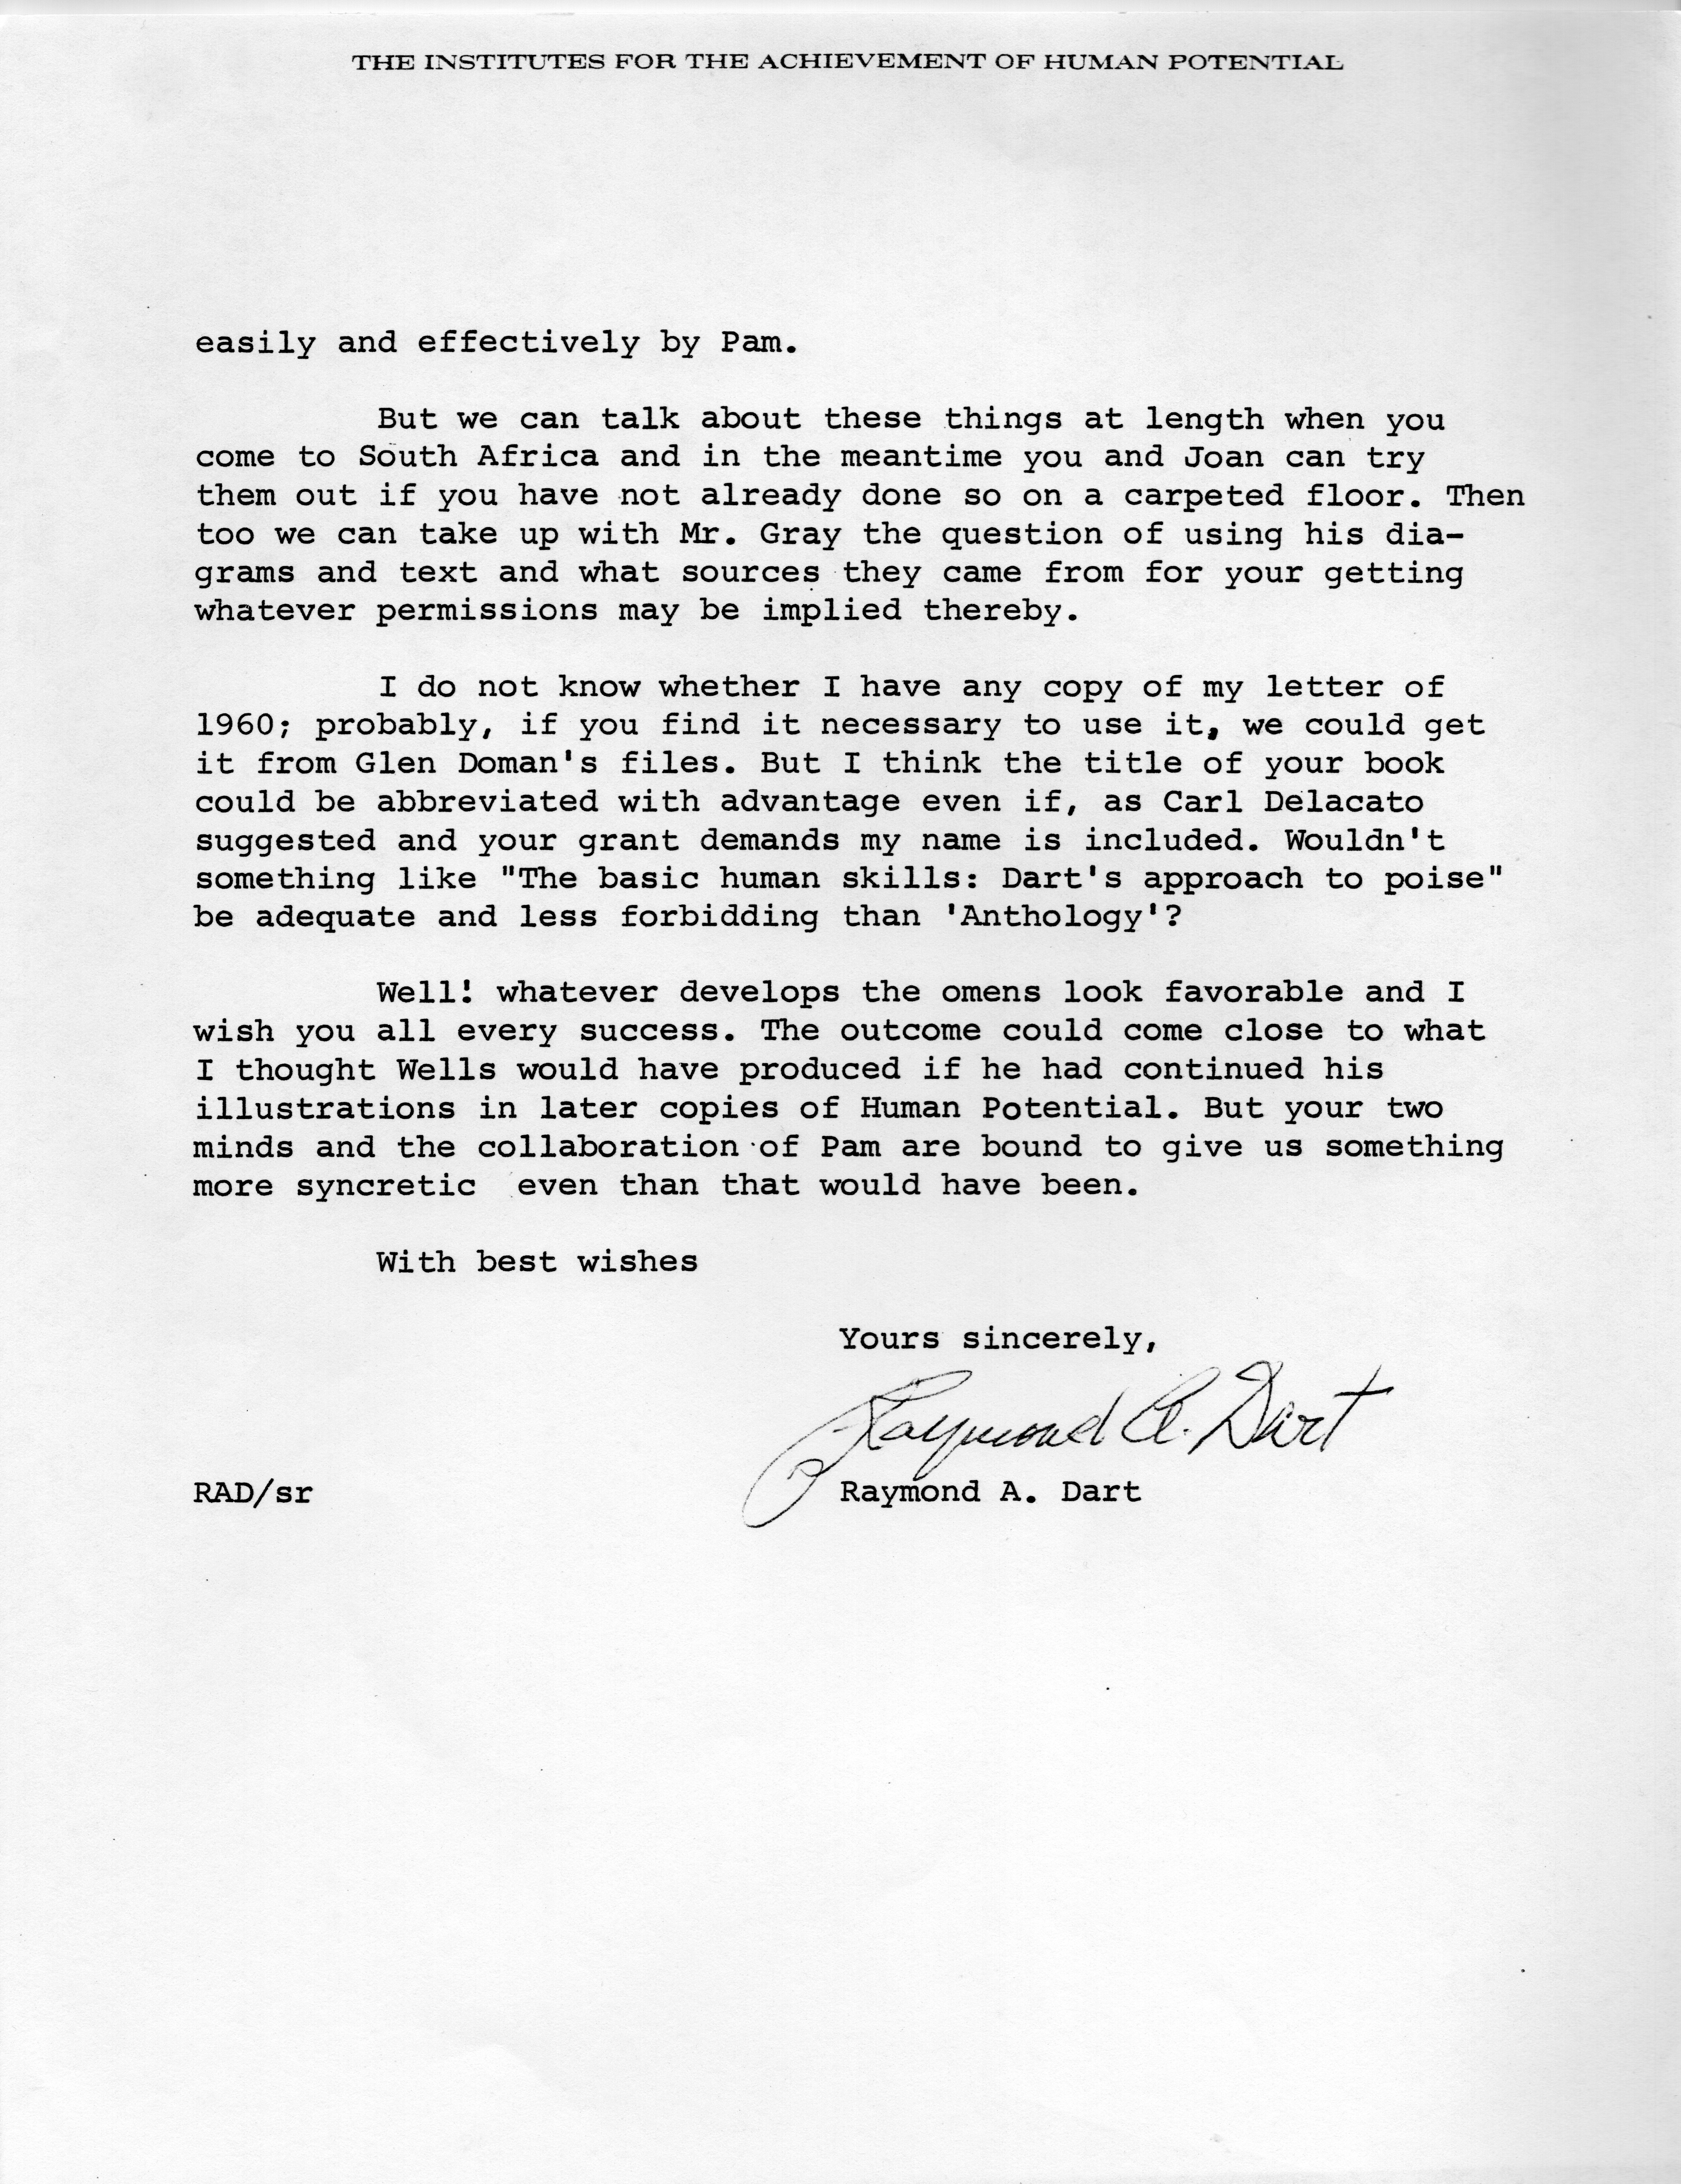 Page 2 of Dart letter to Murray May 20 1971